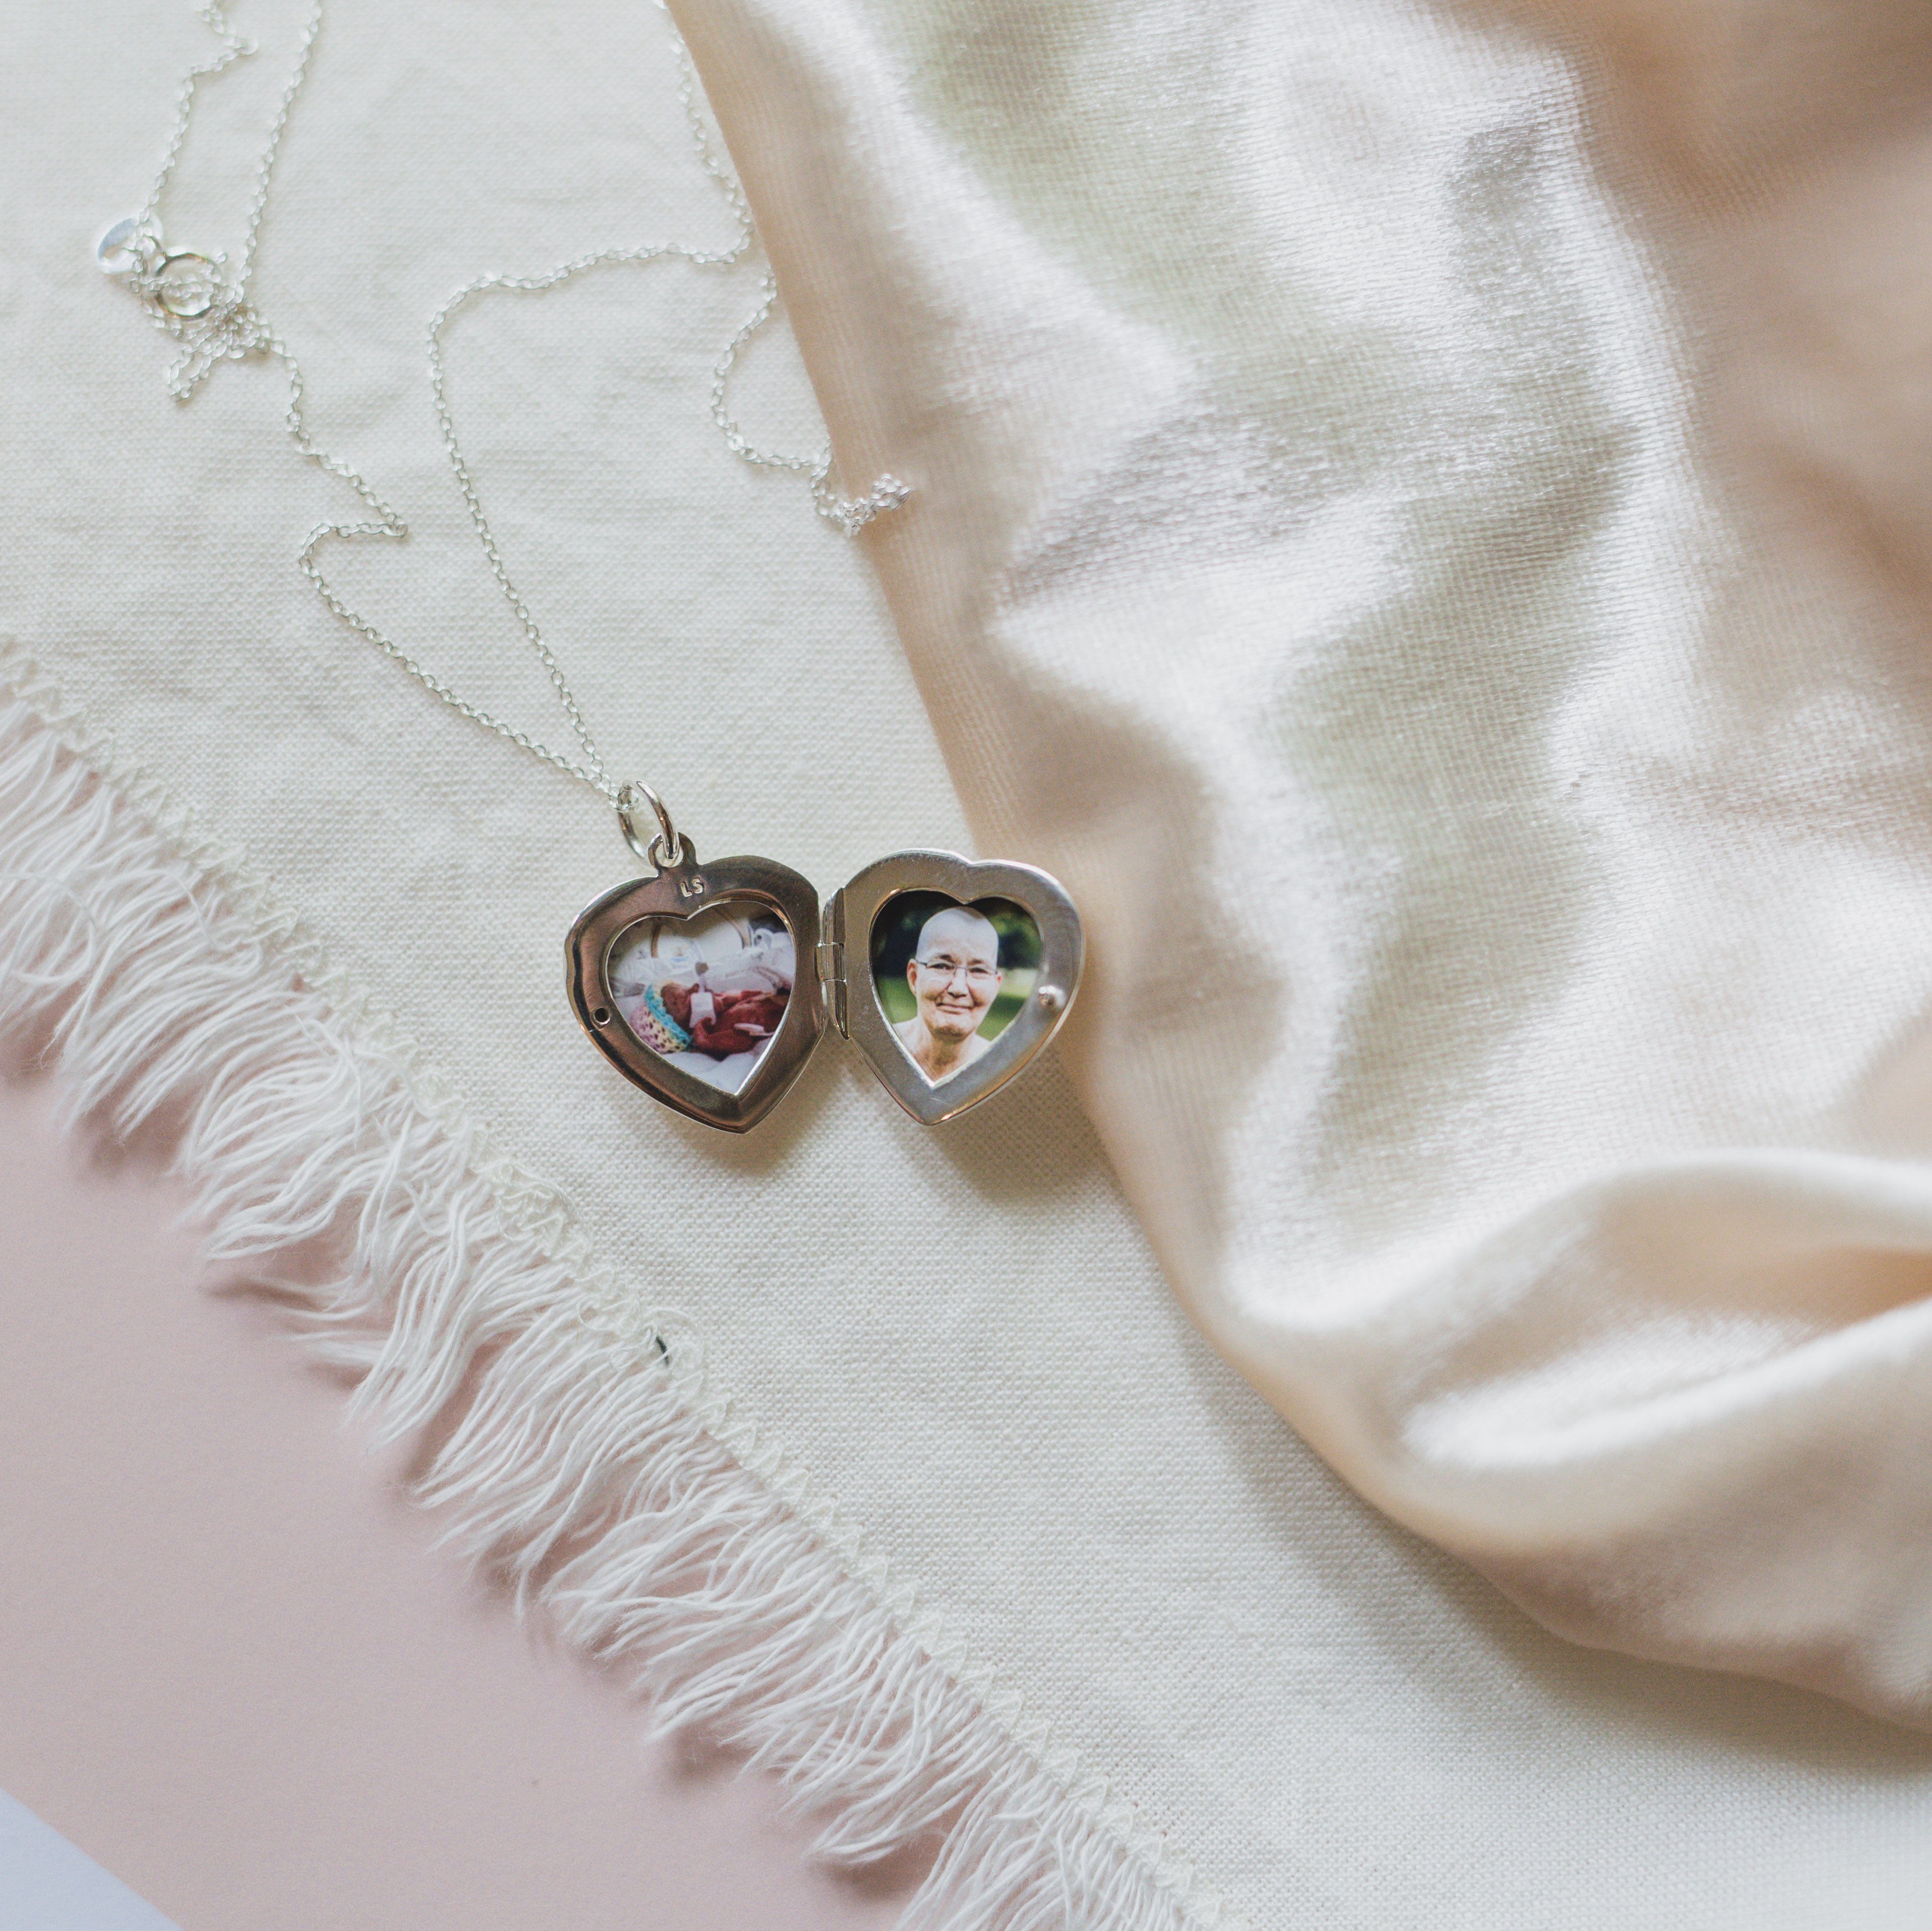 the roxie belle locket raises money for the meow meow foundation in Pasadena, CA, and this locket holds a photo of her bereaved daughter and grandmother in one silver heart locket